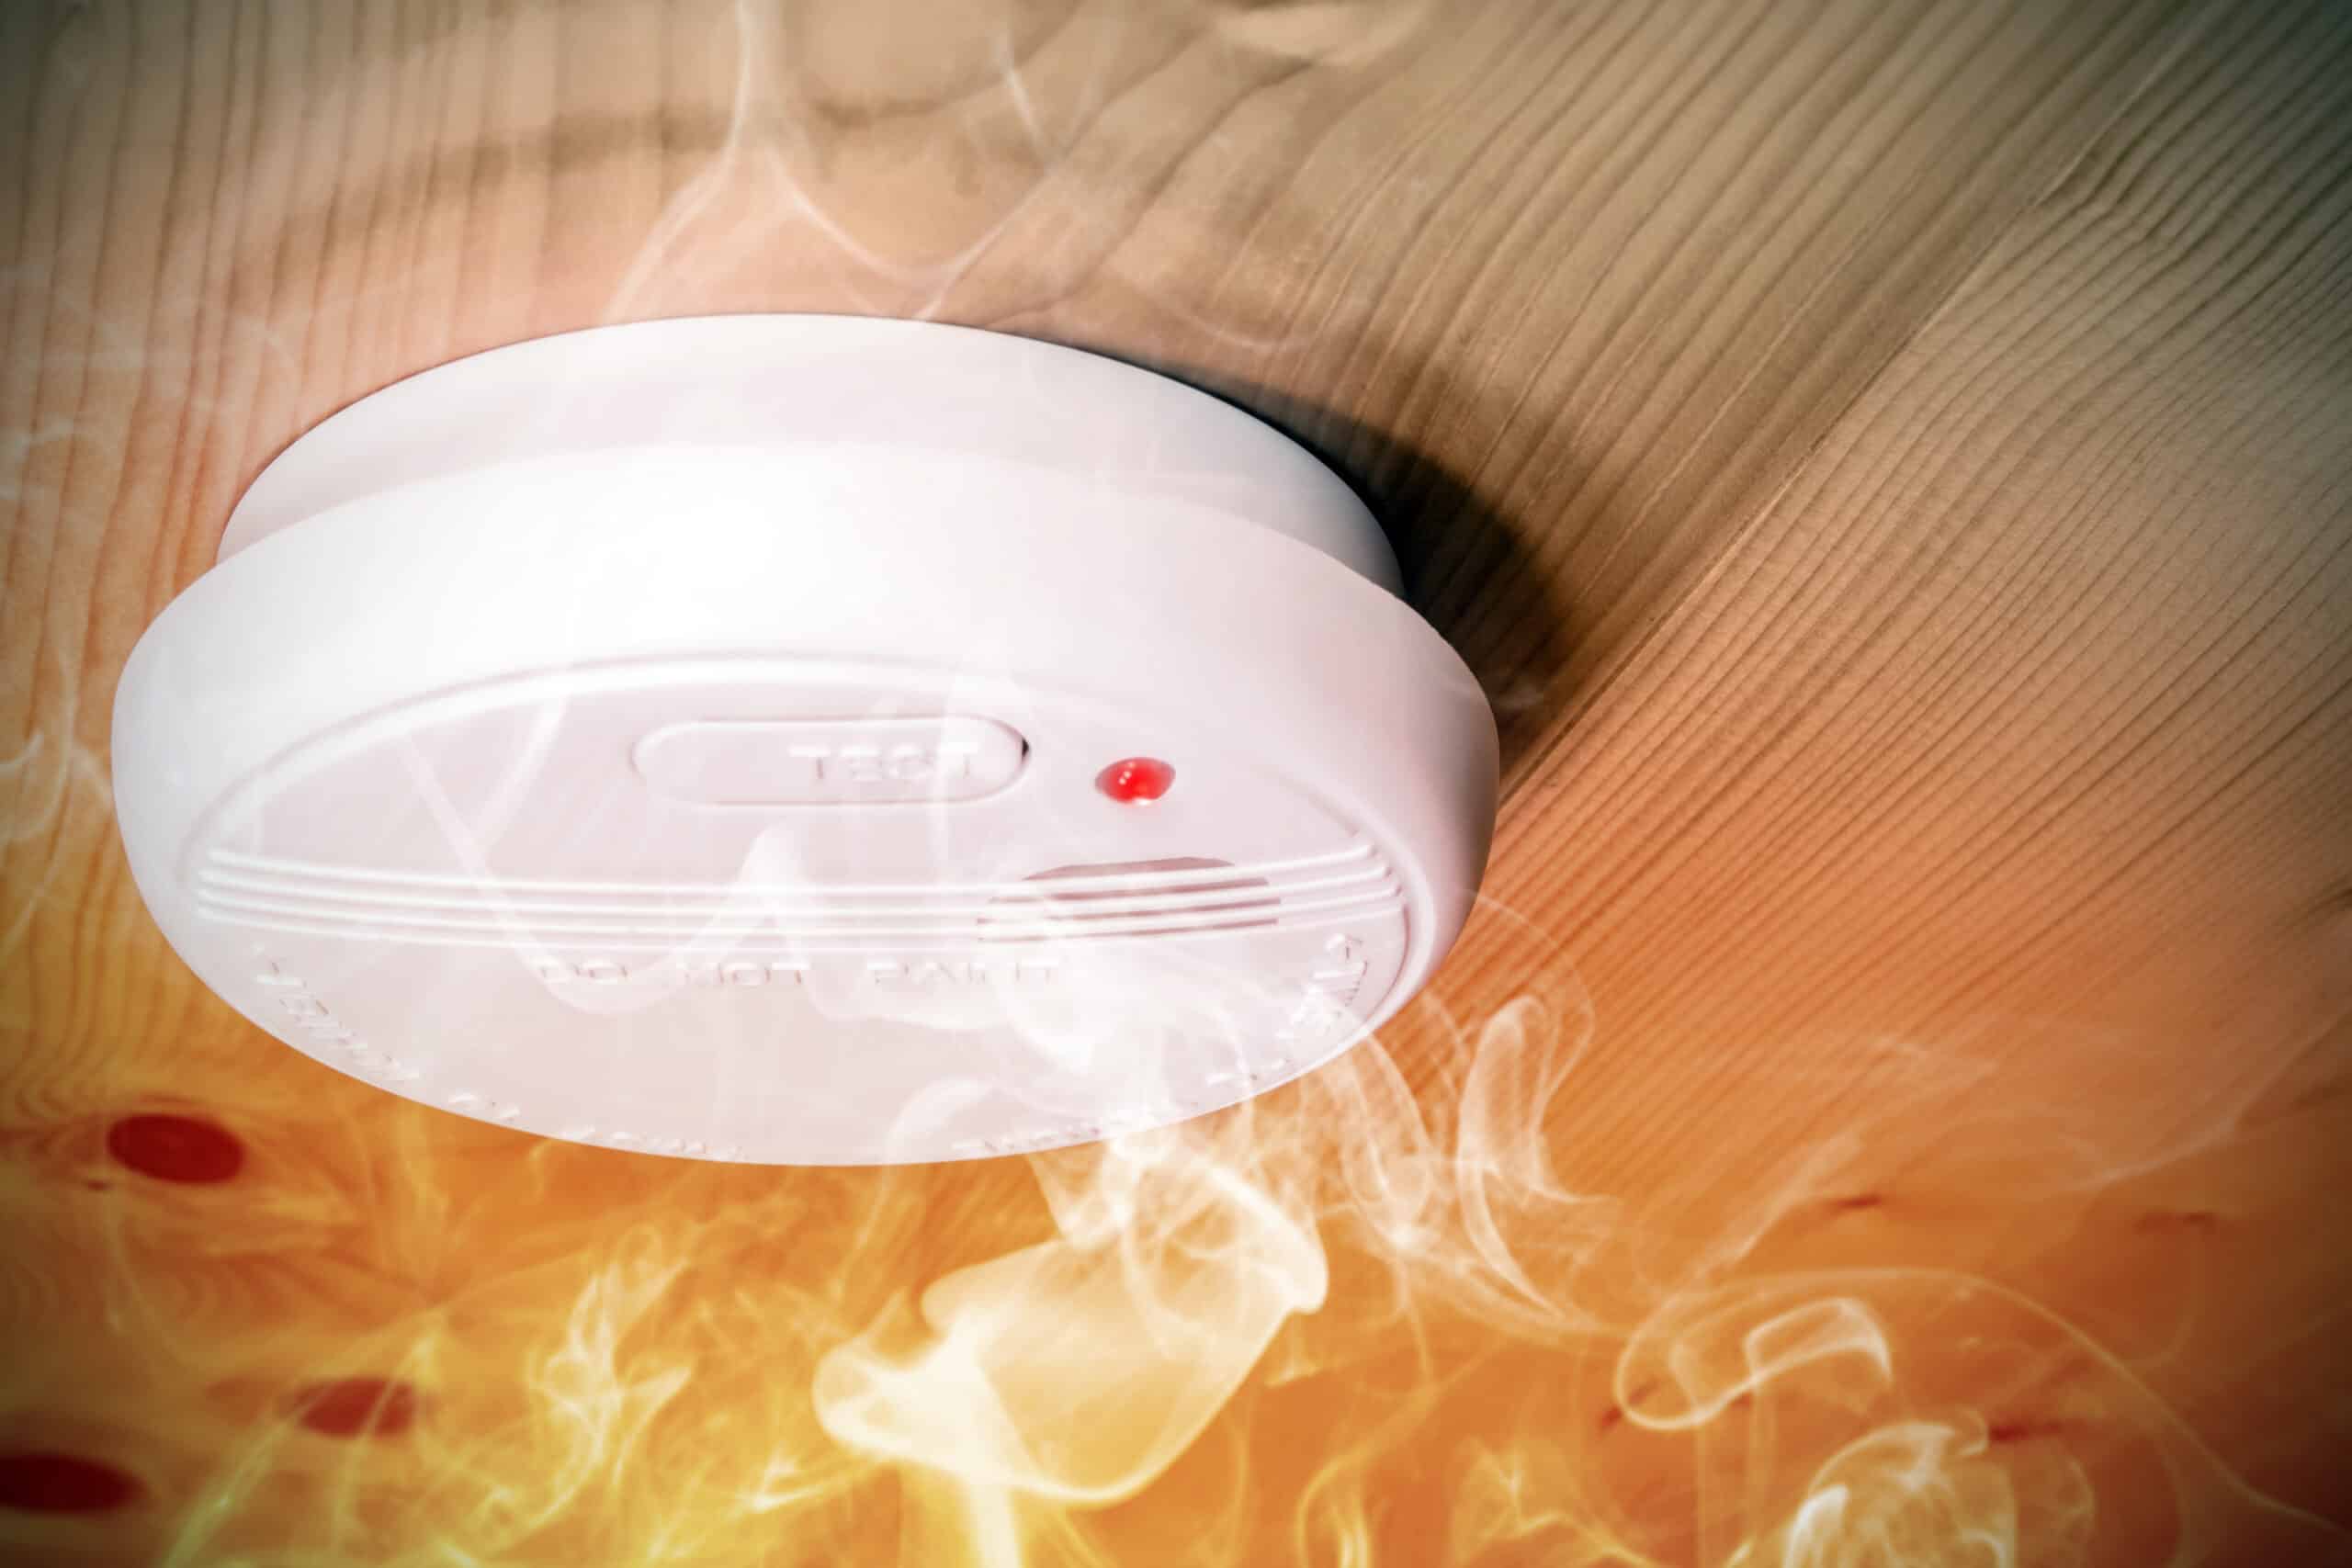 Installing a Smoke and Carbon Monoxide Detector